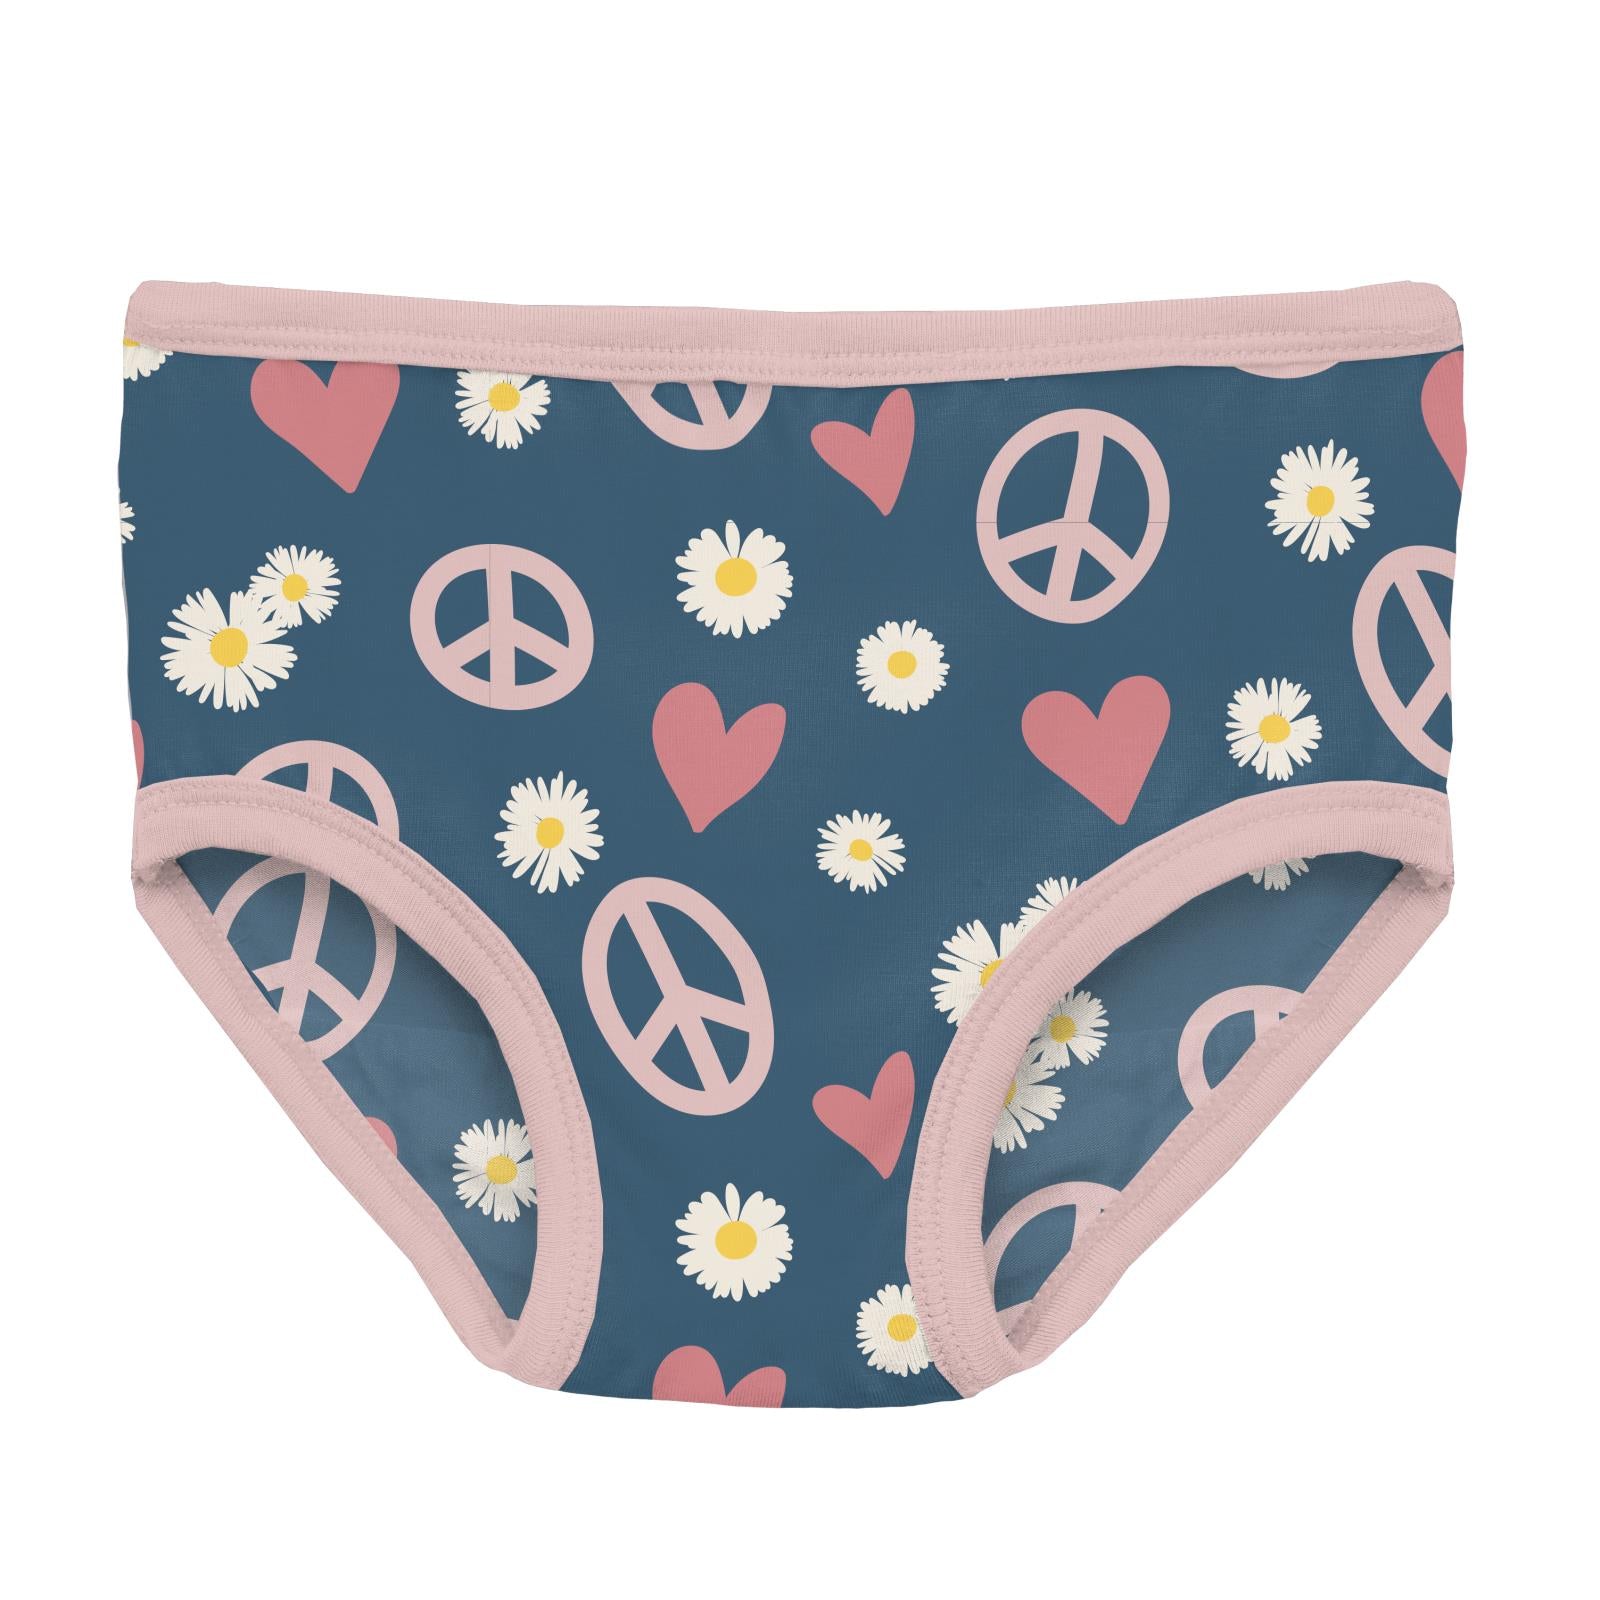 Print Girl's Underwear in Peace, Love and Happiness